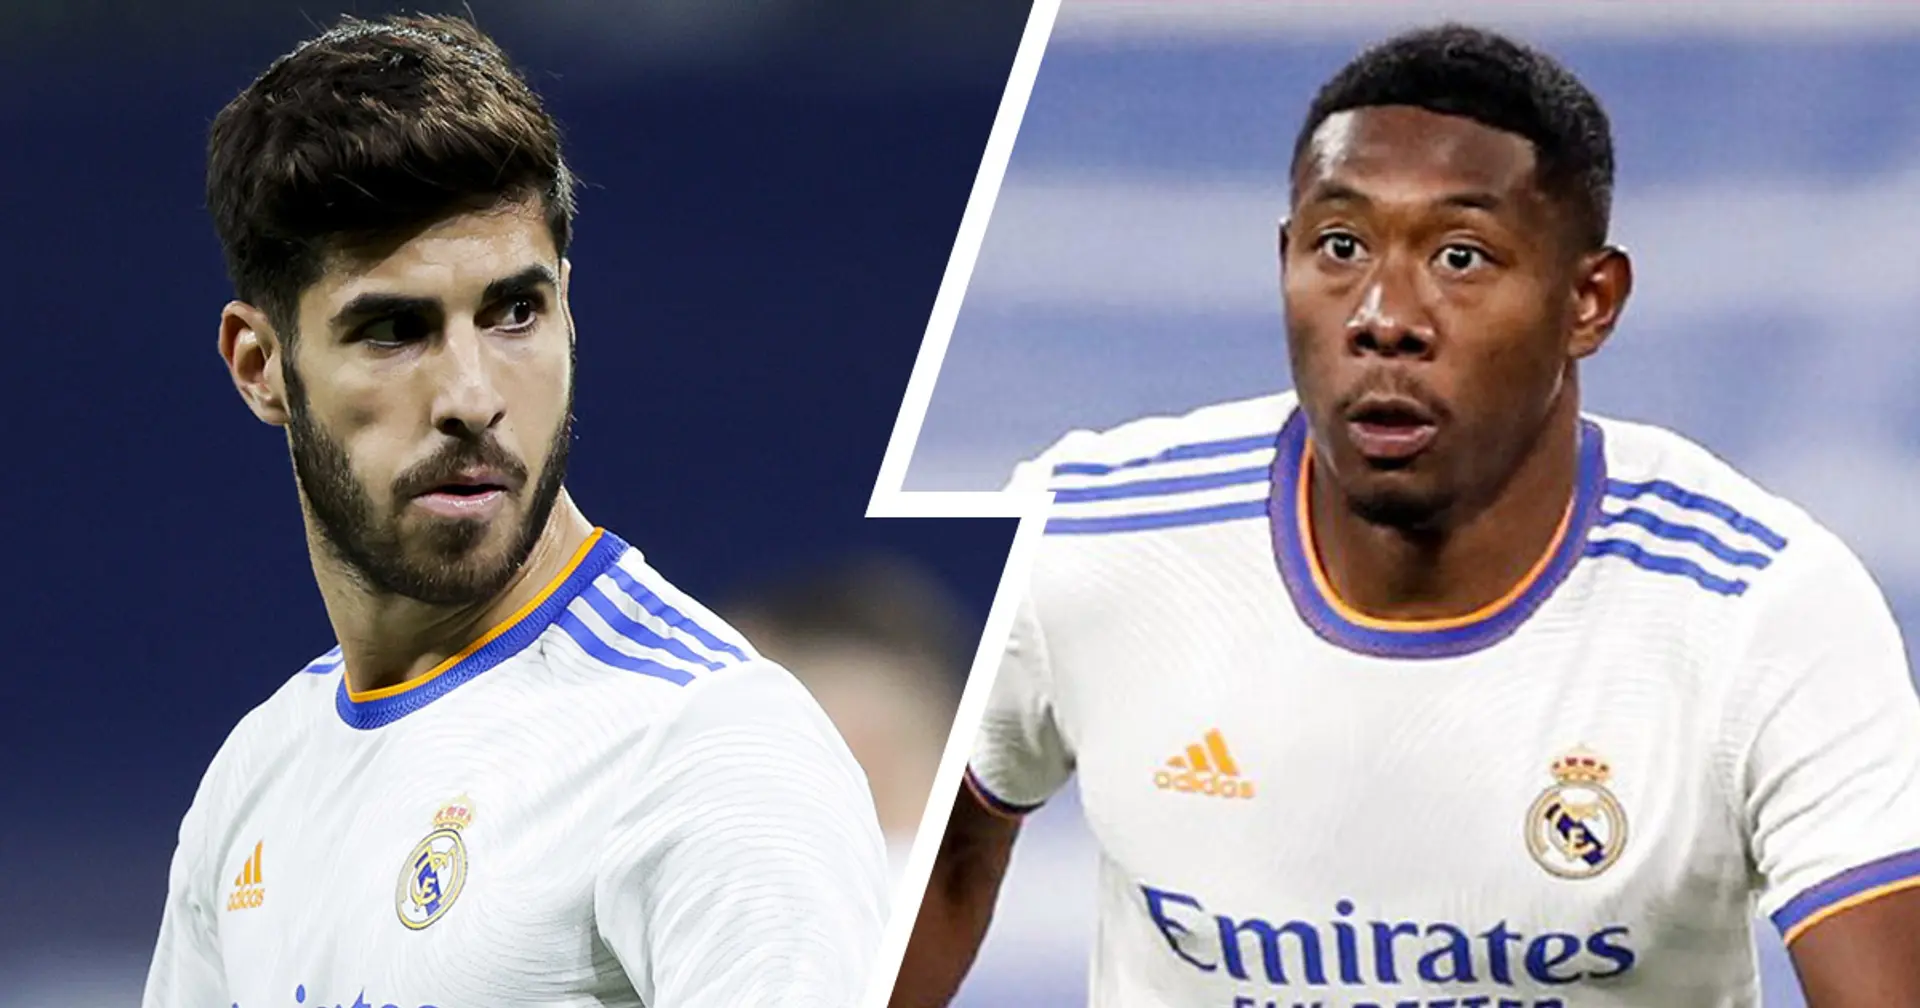 Asensio to miss Supercopa final and 2 more big stories you might've missed